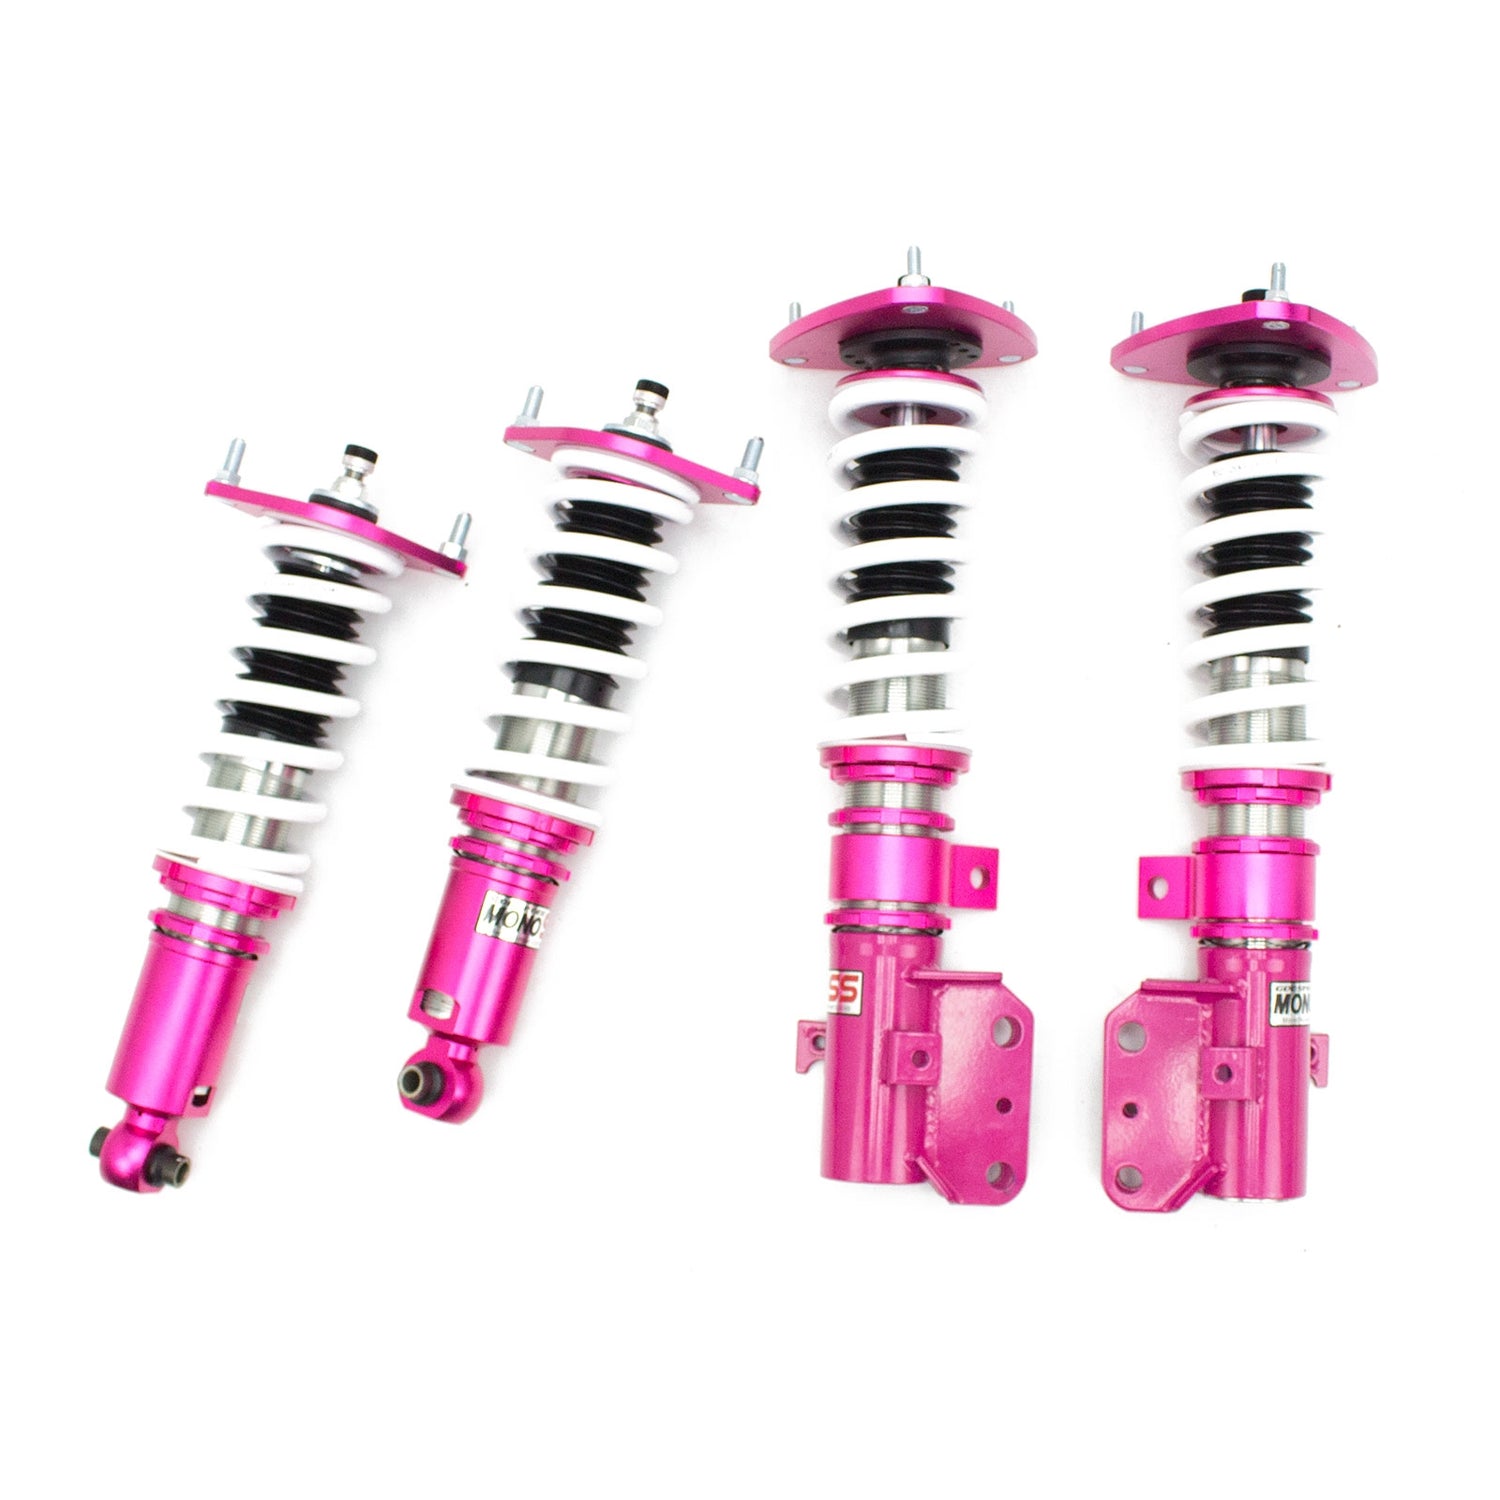 Godspeed(MSS0198) MonoSS Coilover Lowering Kit, Fully Adjustable, Ride Height, Spring Tension And 16 Click Damping, Subaru Legacy(BN/BS) 2015+UP